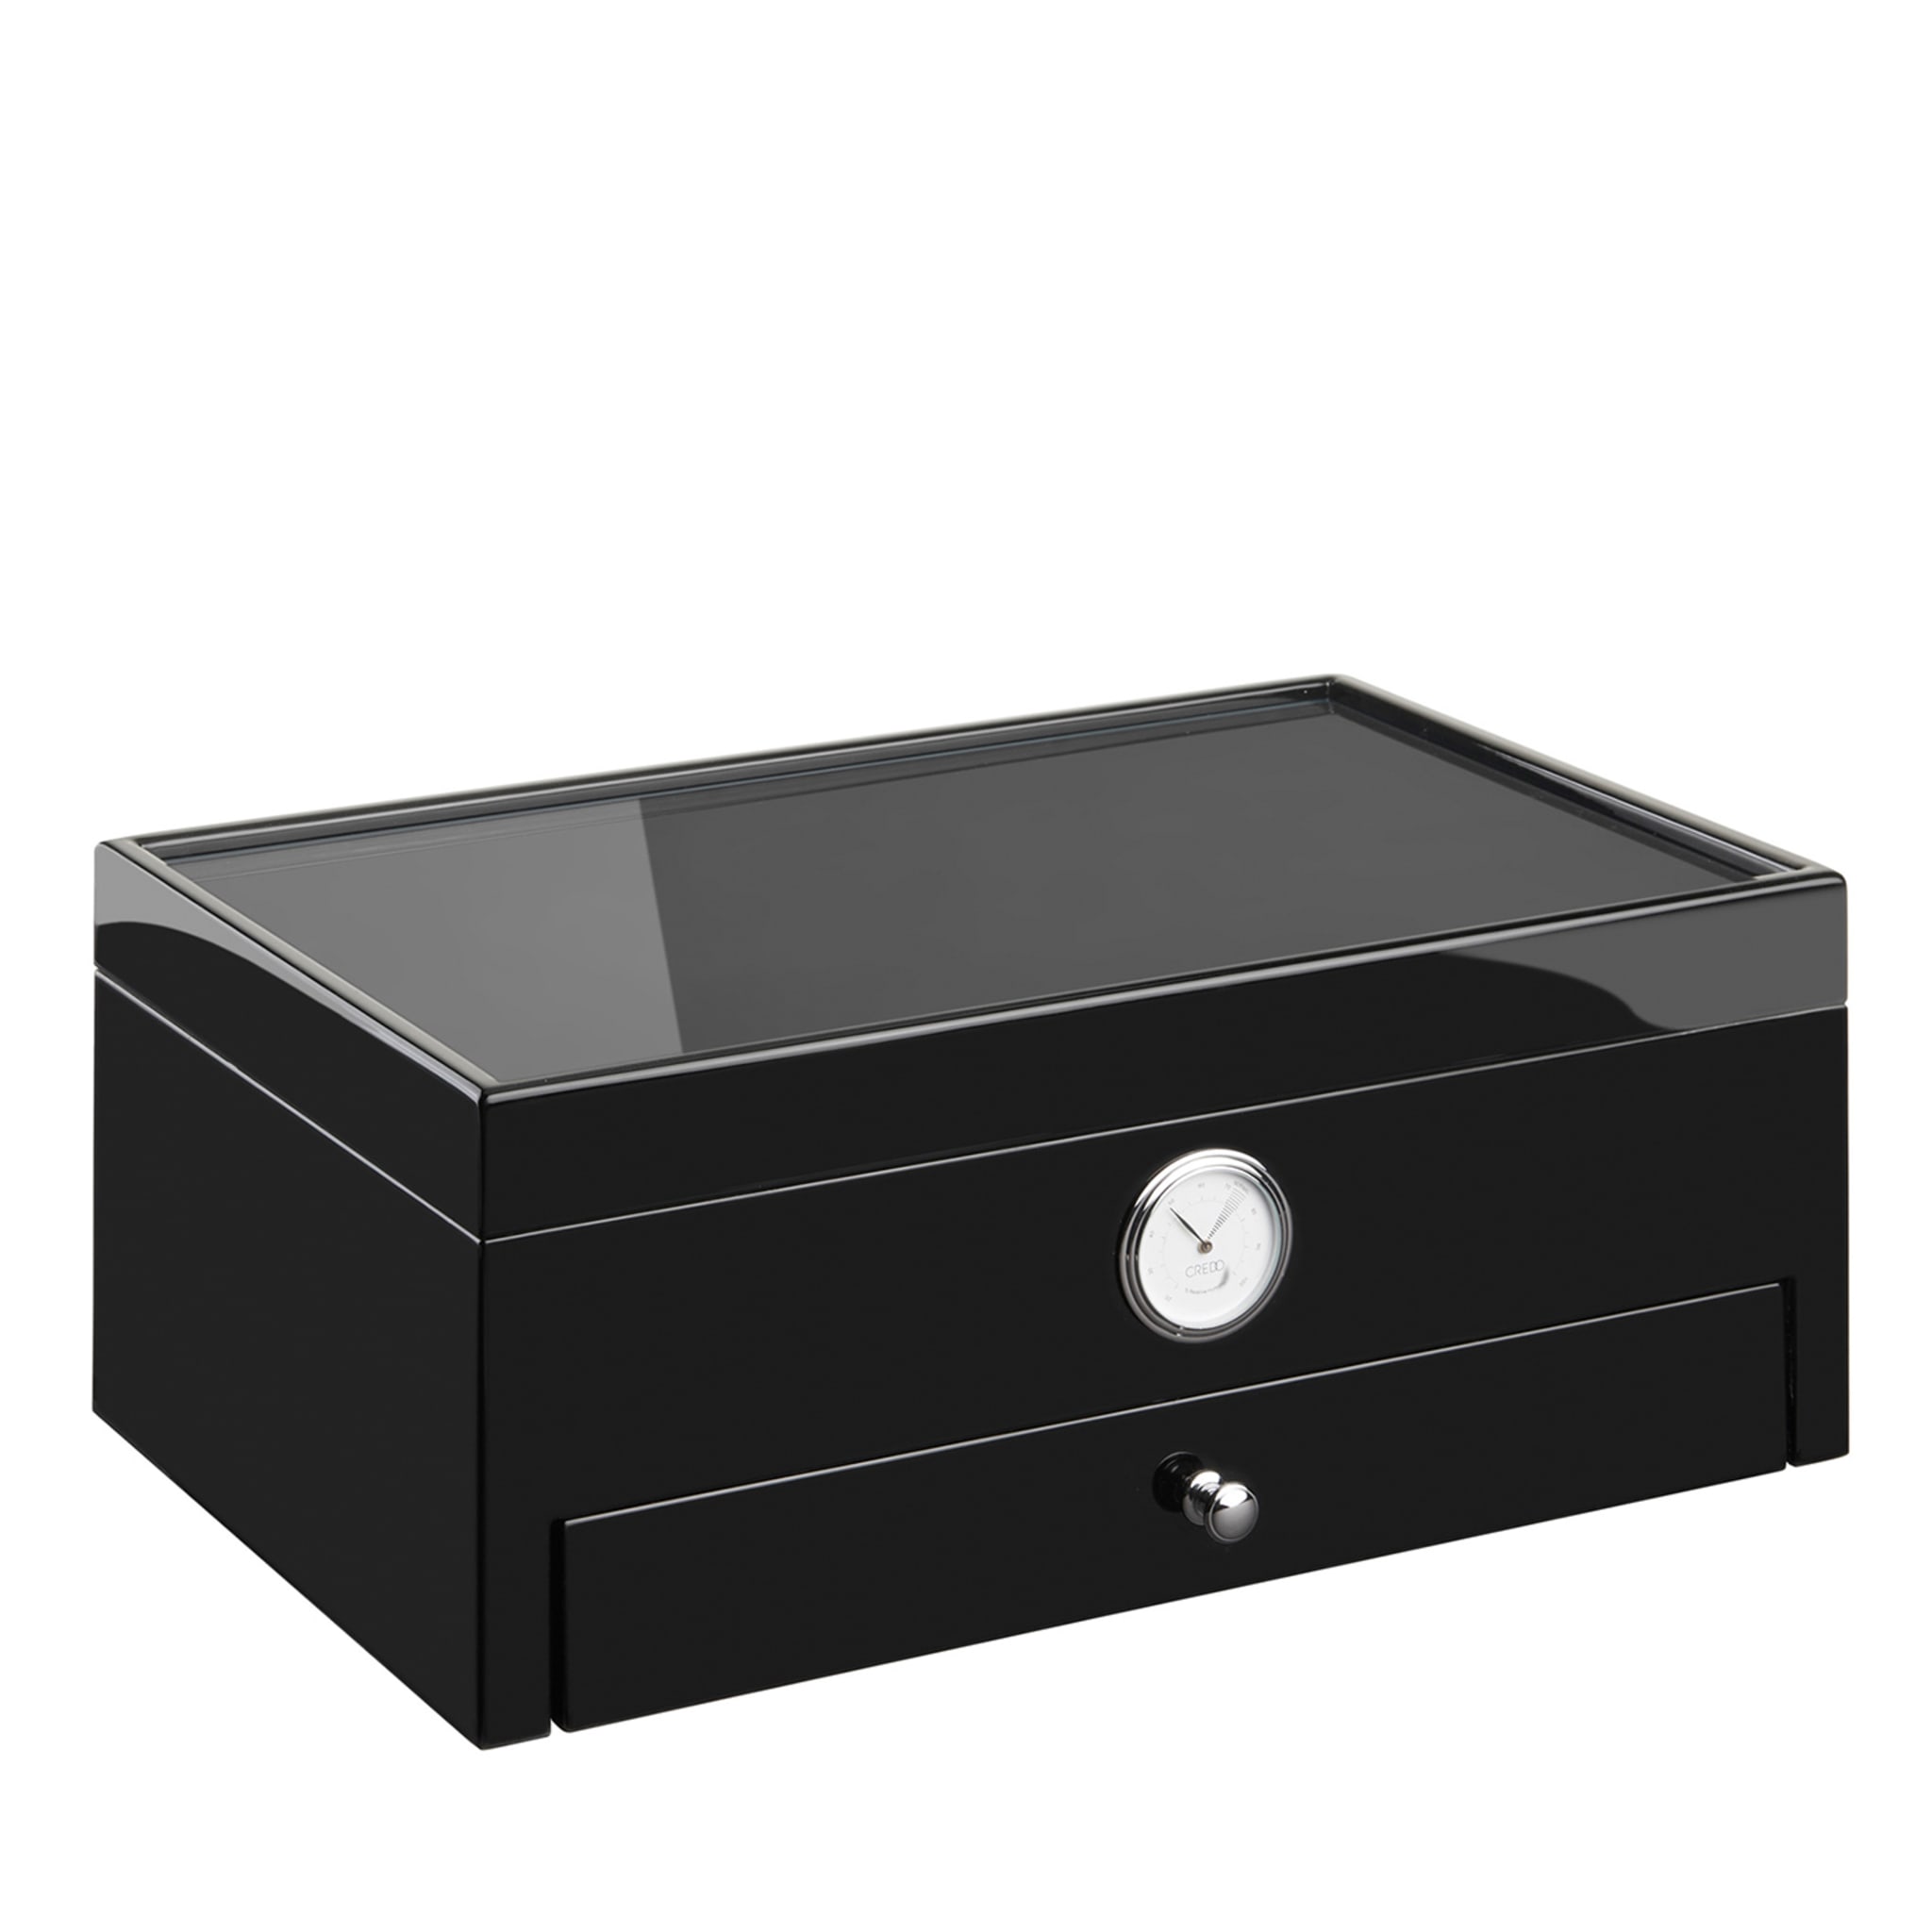 Full Color Black Humidor (Special Club Edition) - Main view